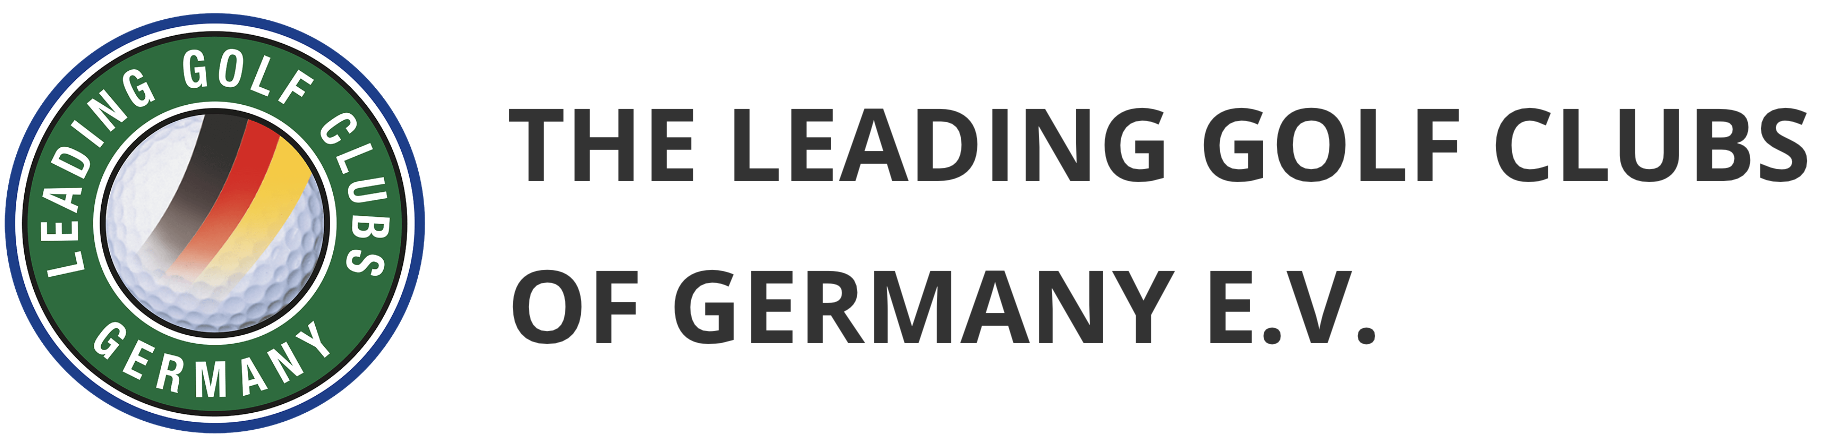 Leading Golf Clubs Germany